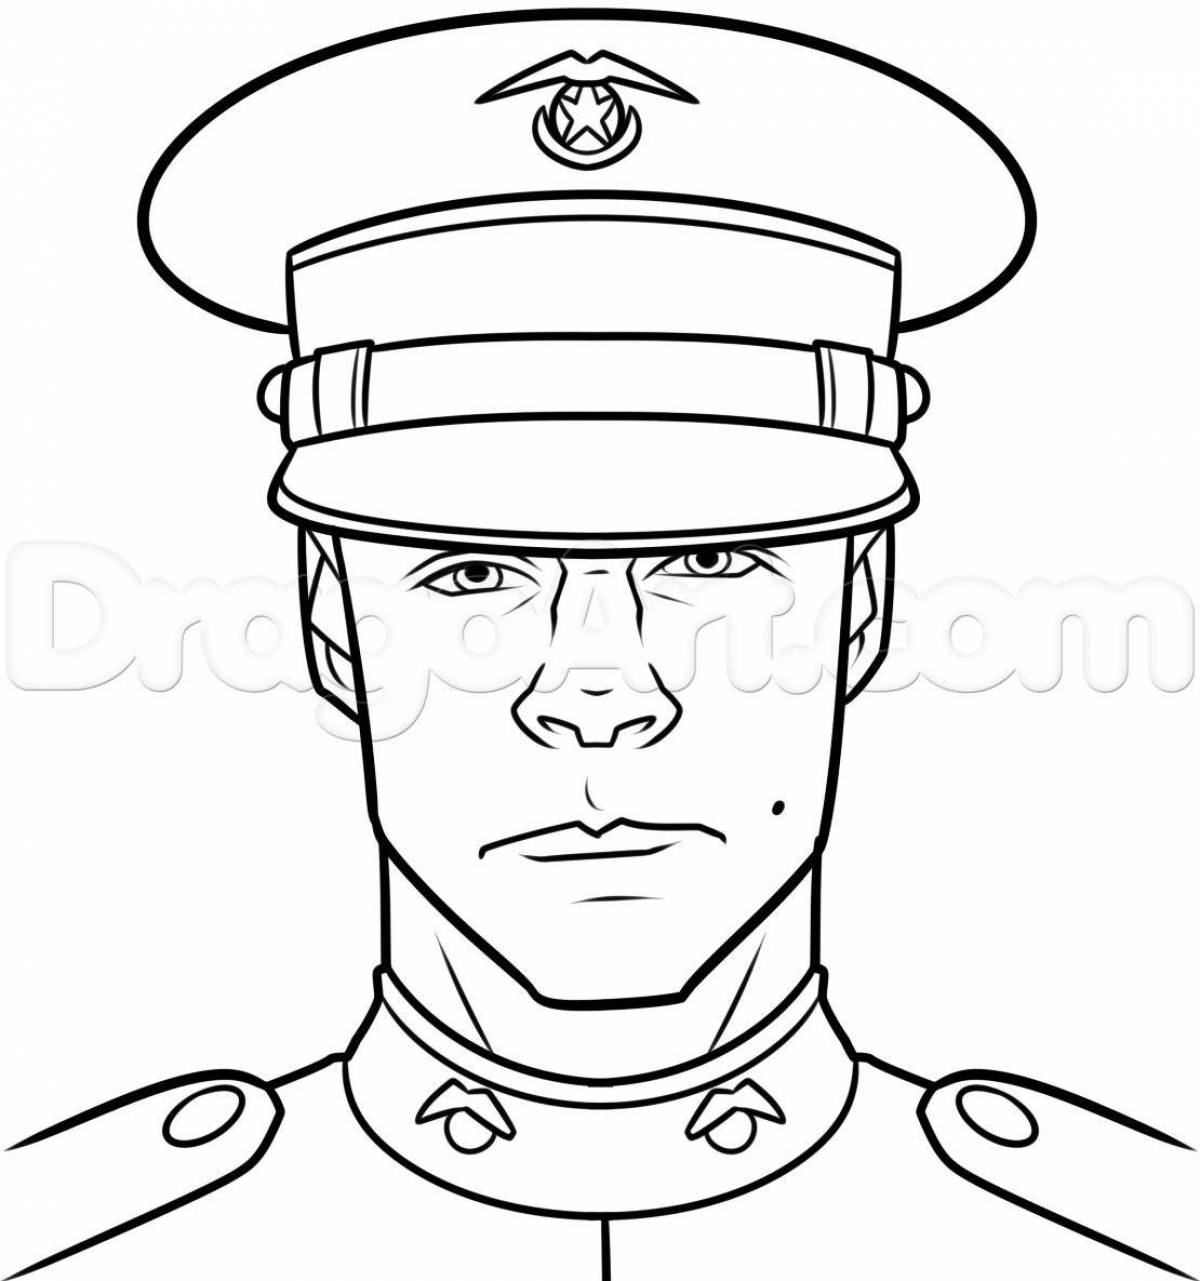 Gorgeous soldier face coloring for kids